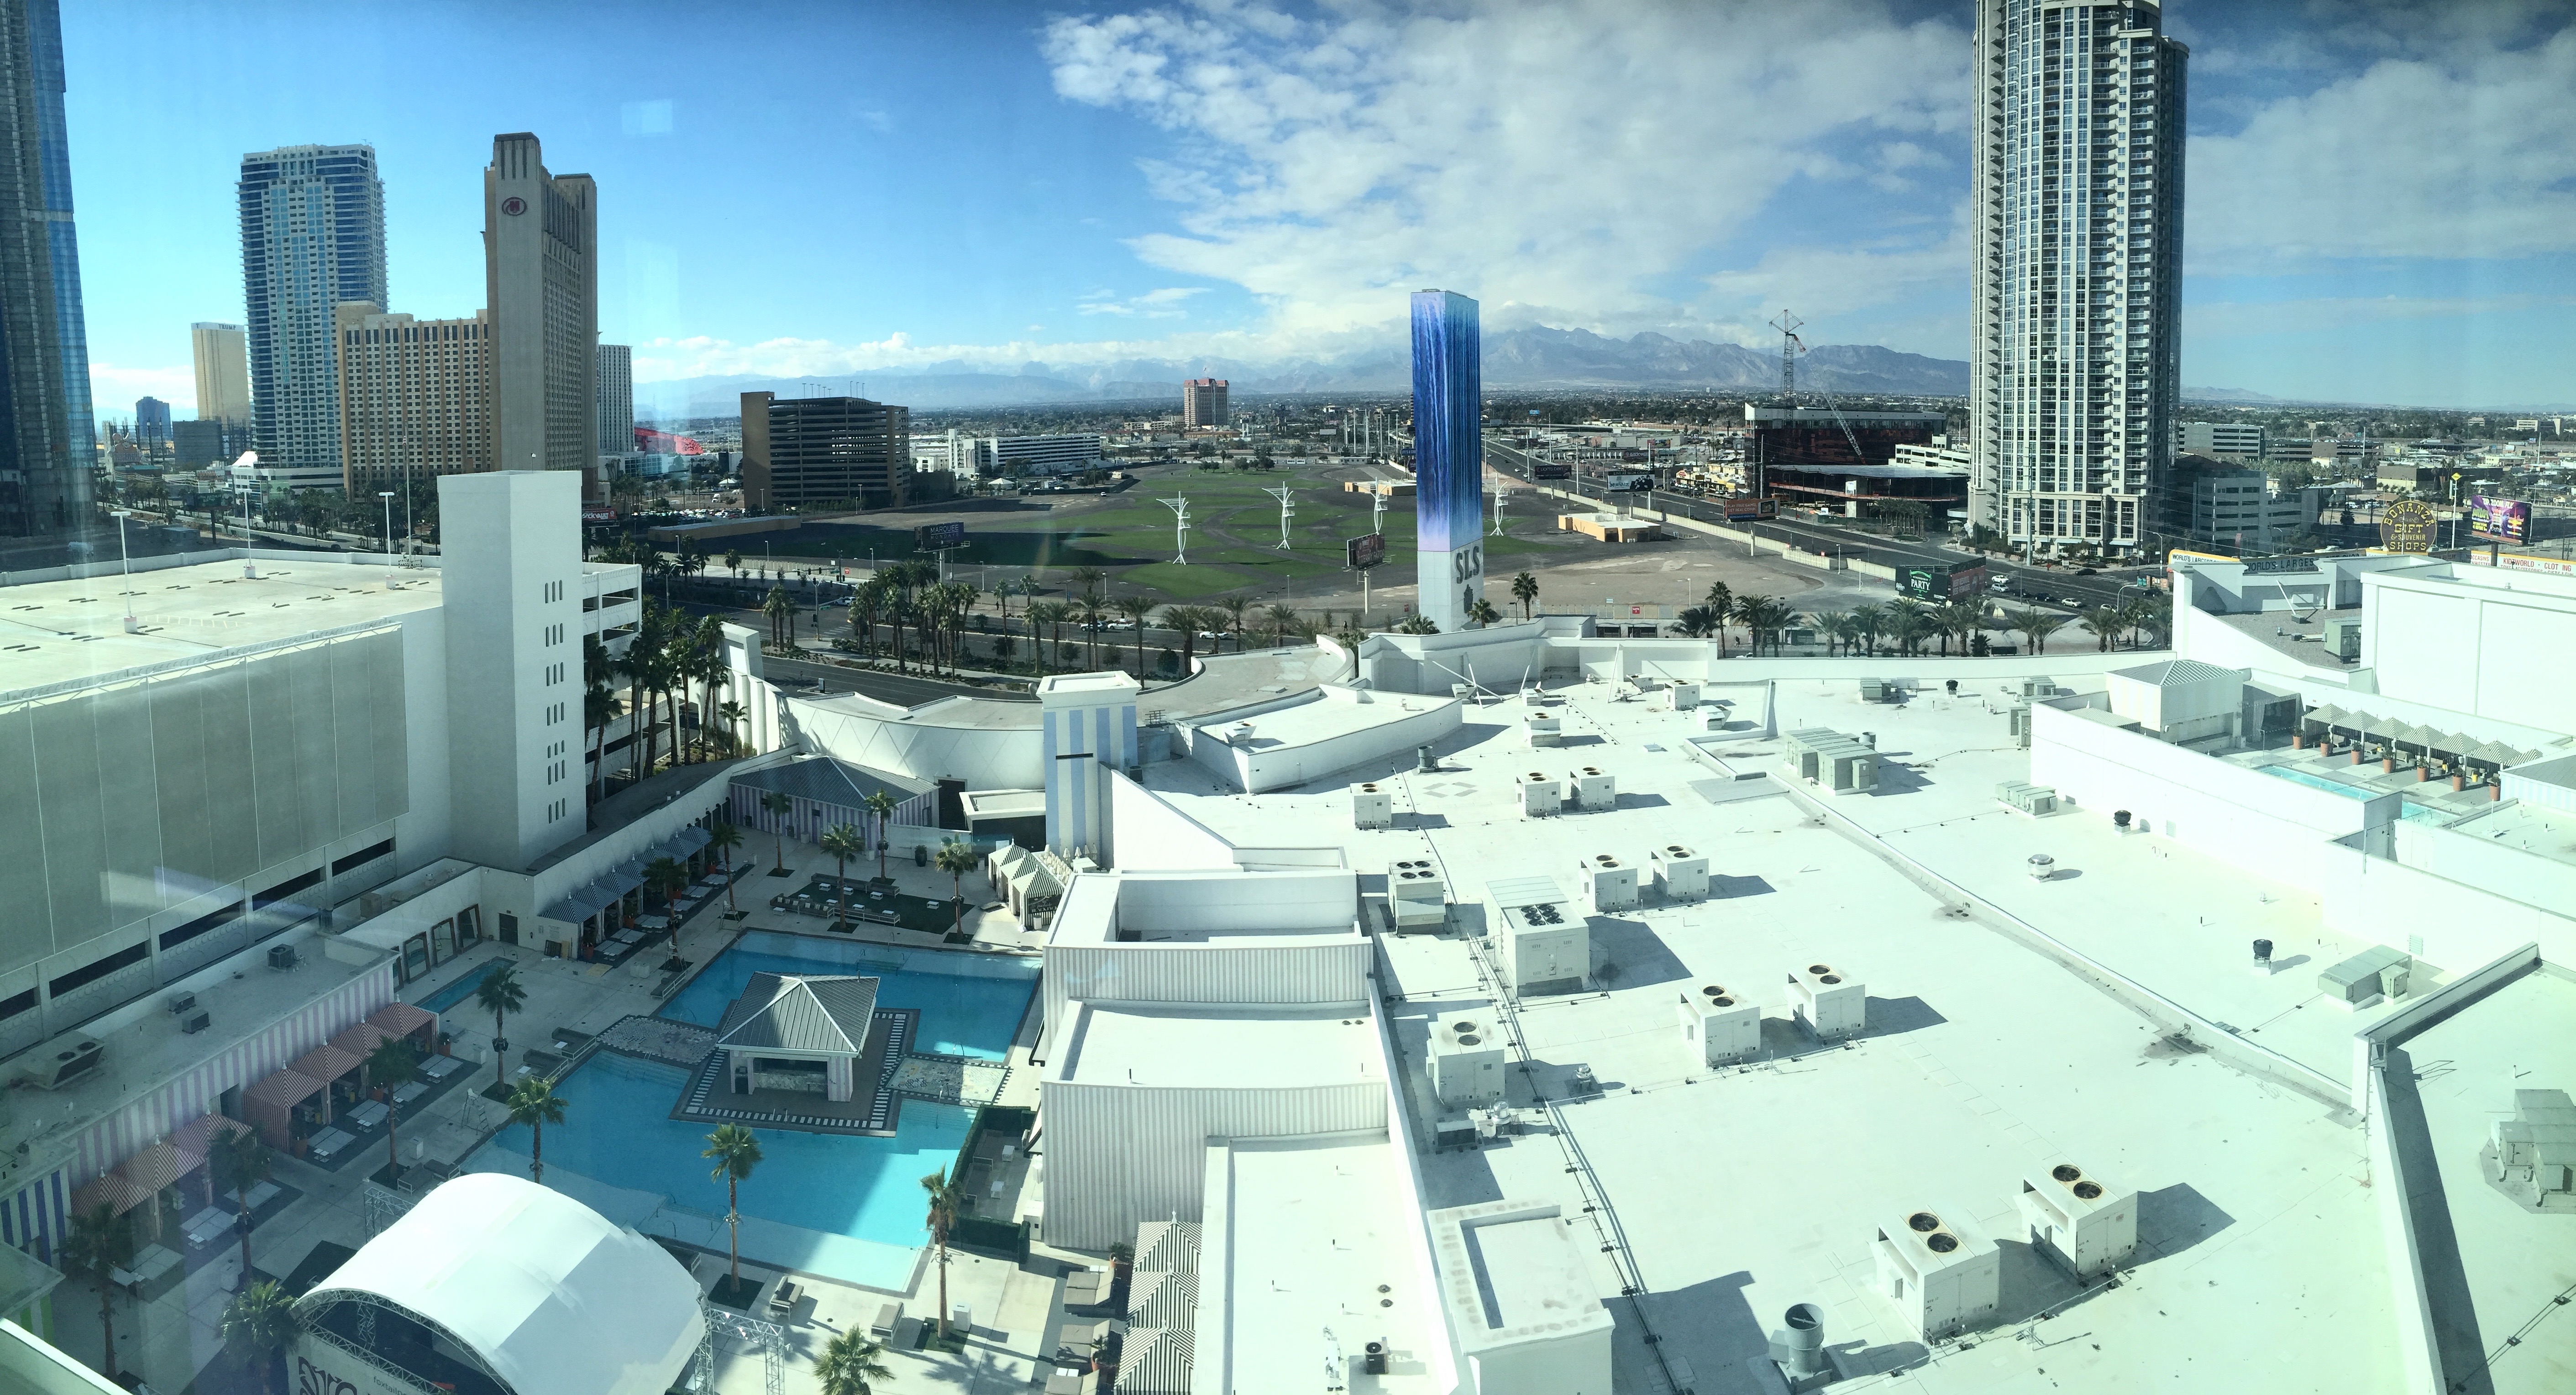 View from LUX tower at SLS Las Vegas